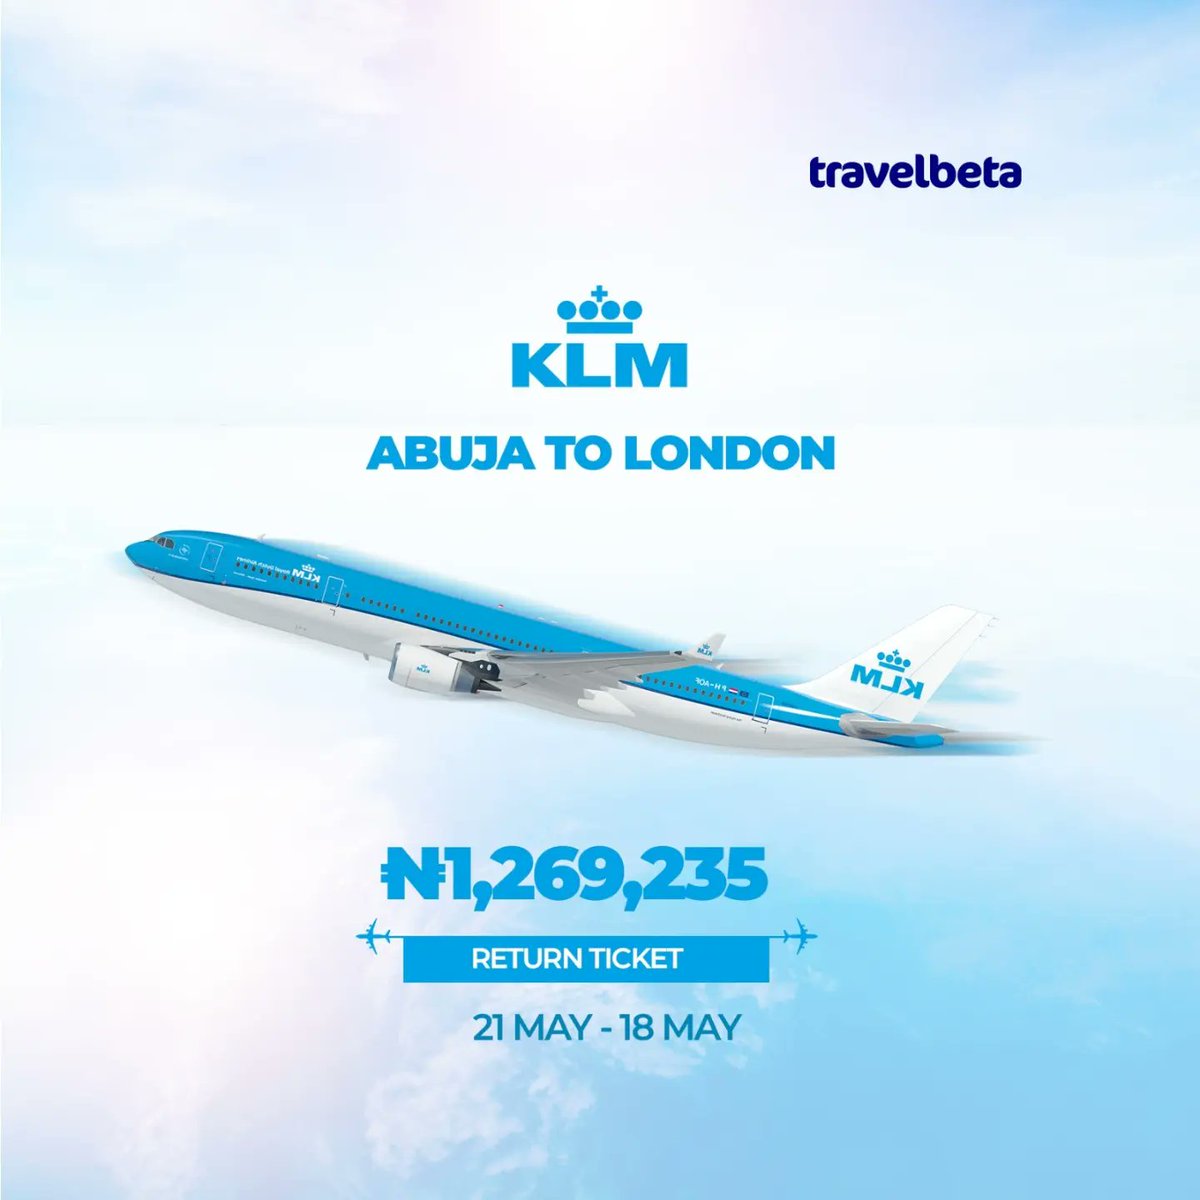 Grab exclusive flight deals when flying @KLM 😎

Swipe left ➡️ 

For more details:
Call 📞 07001110111
WhatsApp 📞08170003419
Email 📧  hotels@travelbeta.com
Visit travelbeta.com